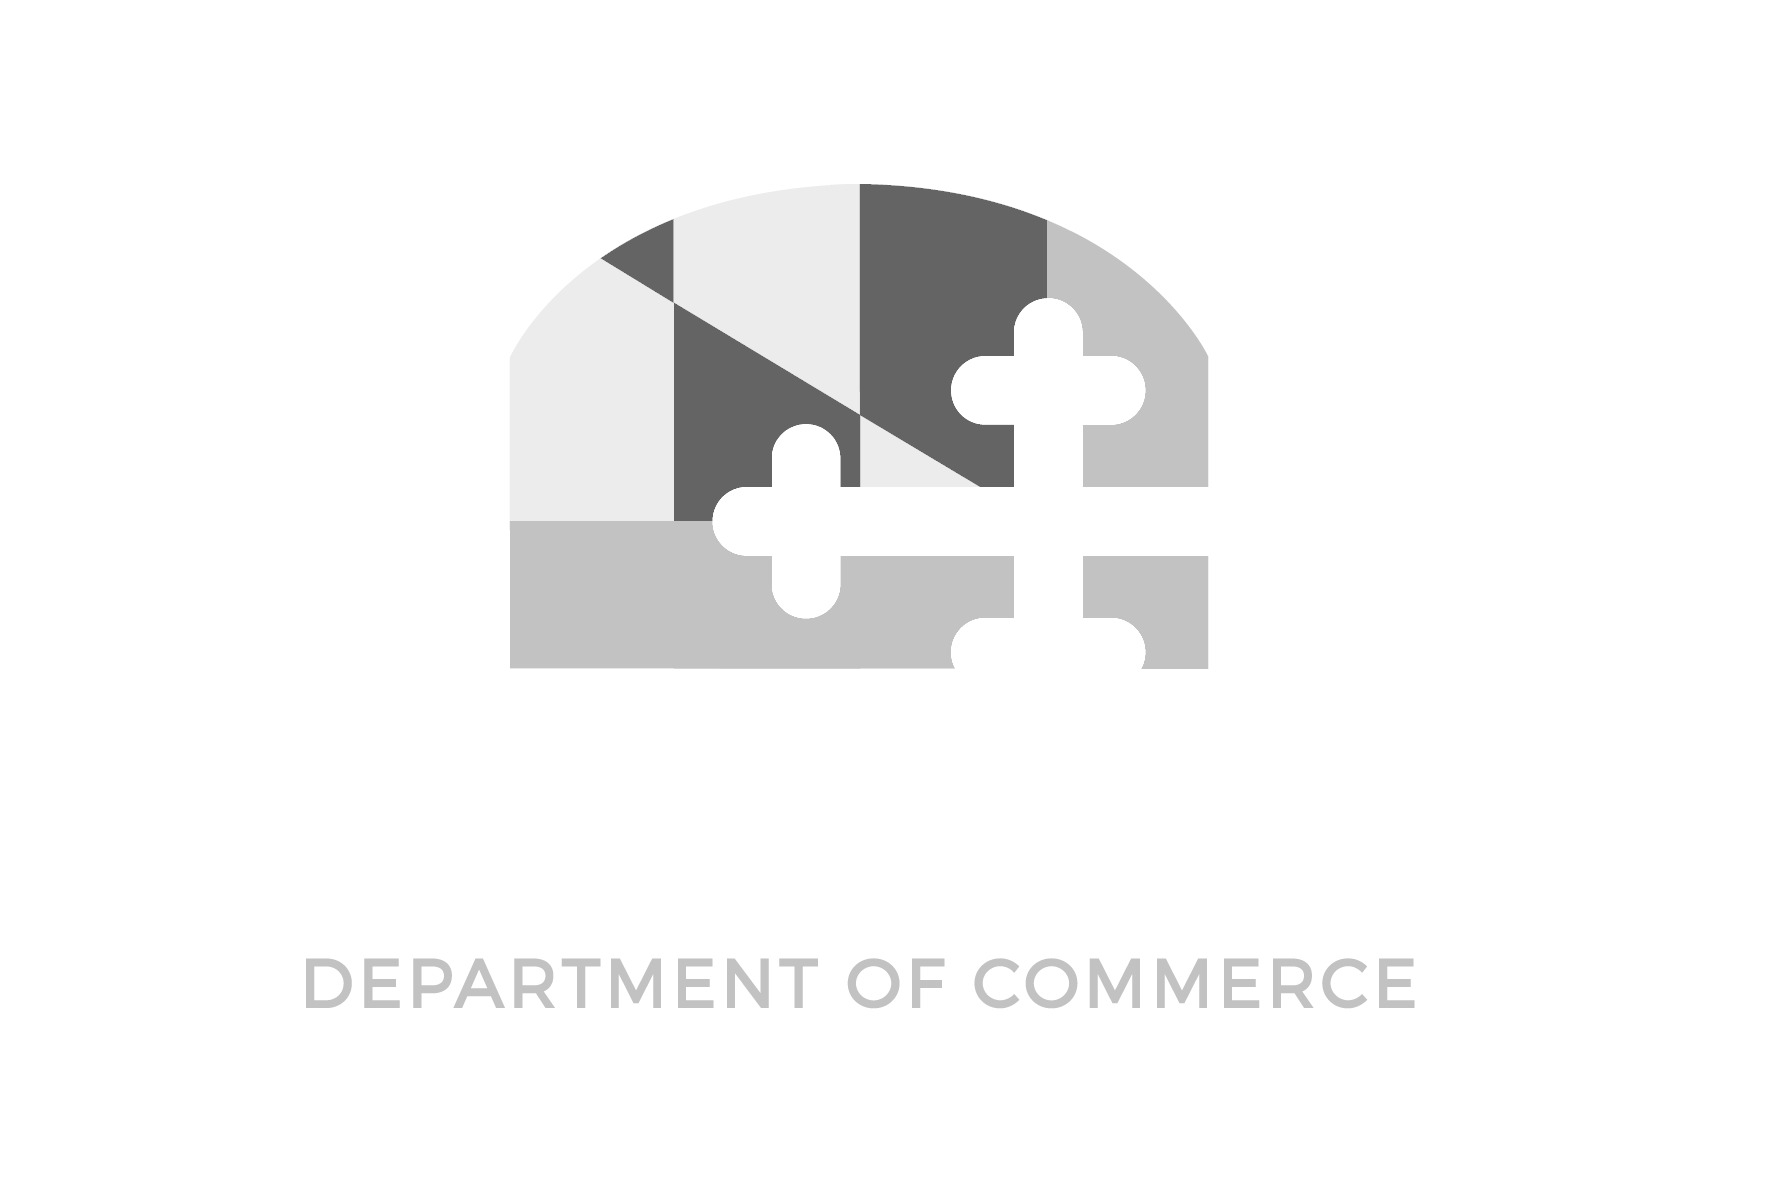 Maryland Department of Commerce logo